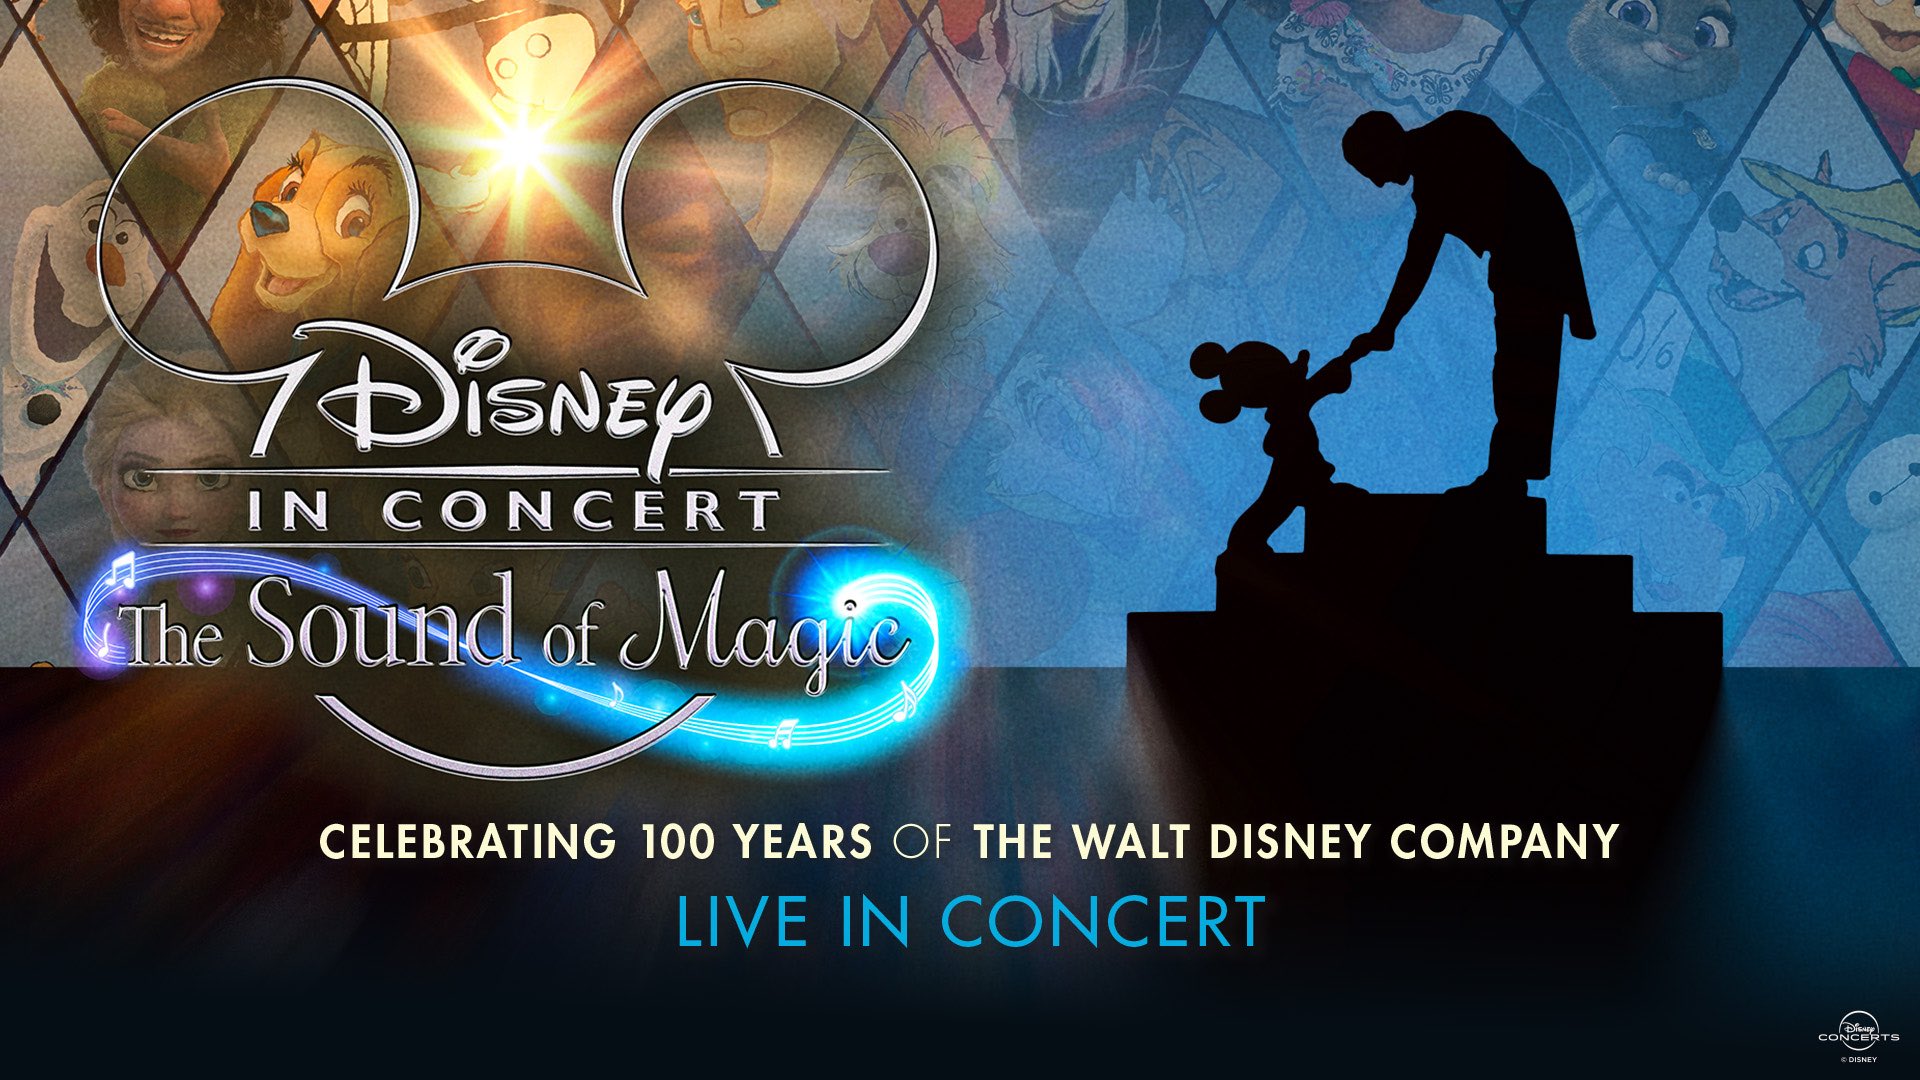 Disney in Concert The Sound of Magic Celebrating 100 years of The Walt Disney Company Live in Concert